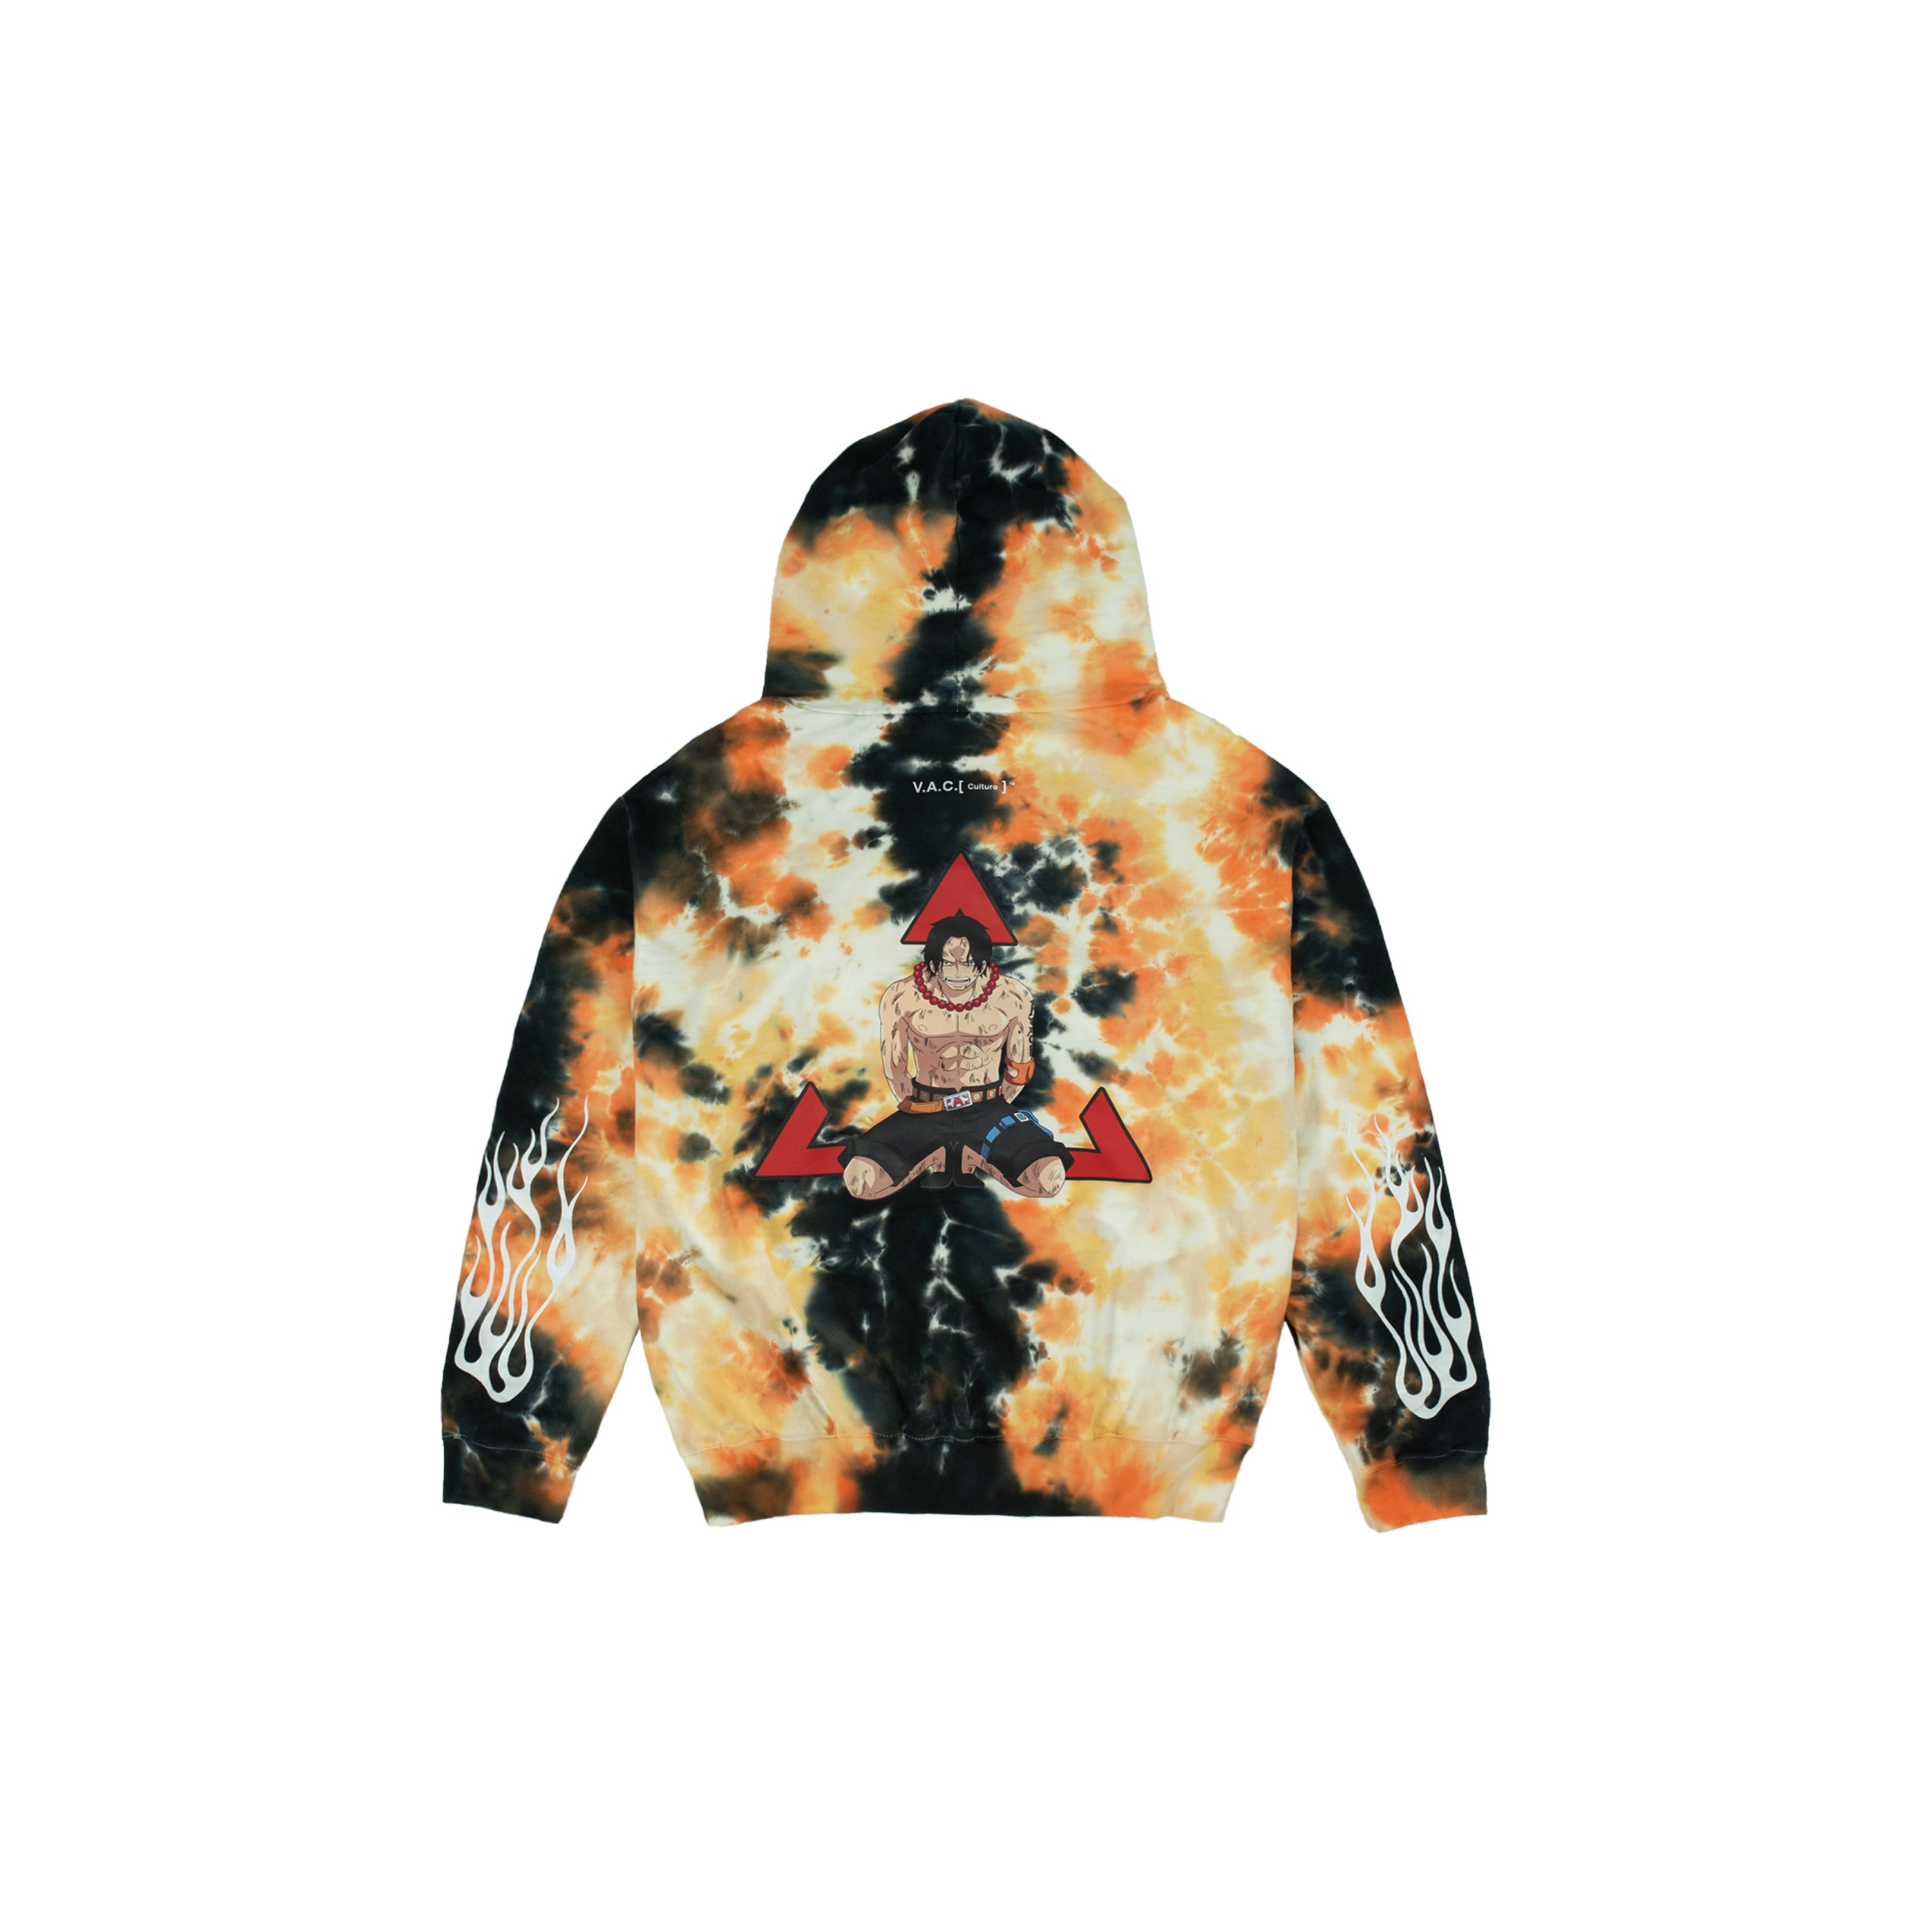 V.A.C.[ Culture ]™️ : One Piece Hoodie Ace